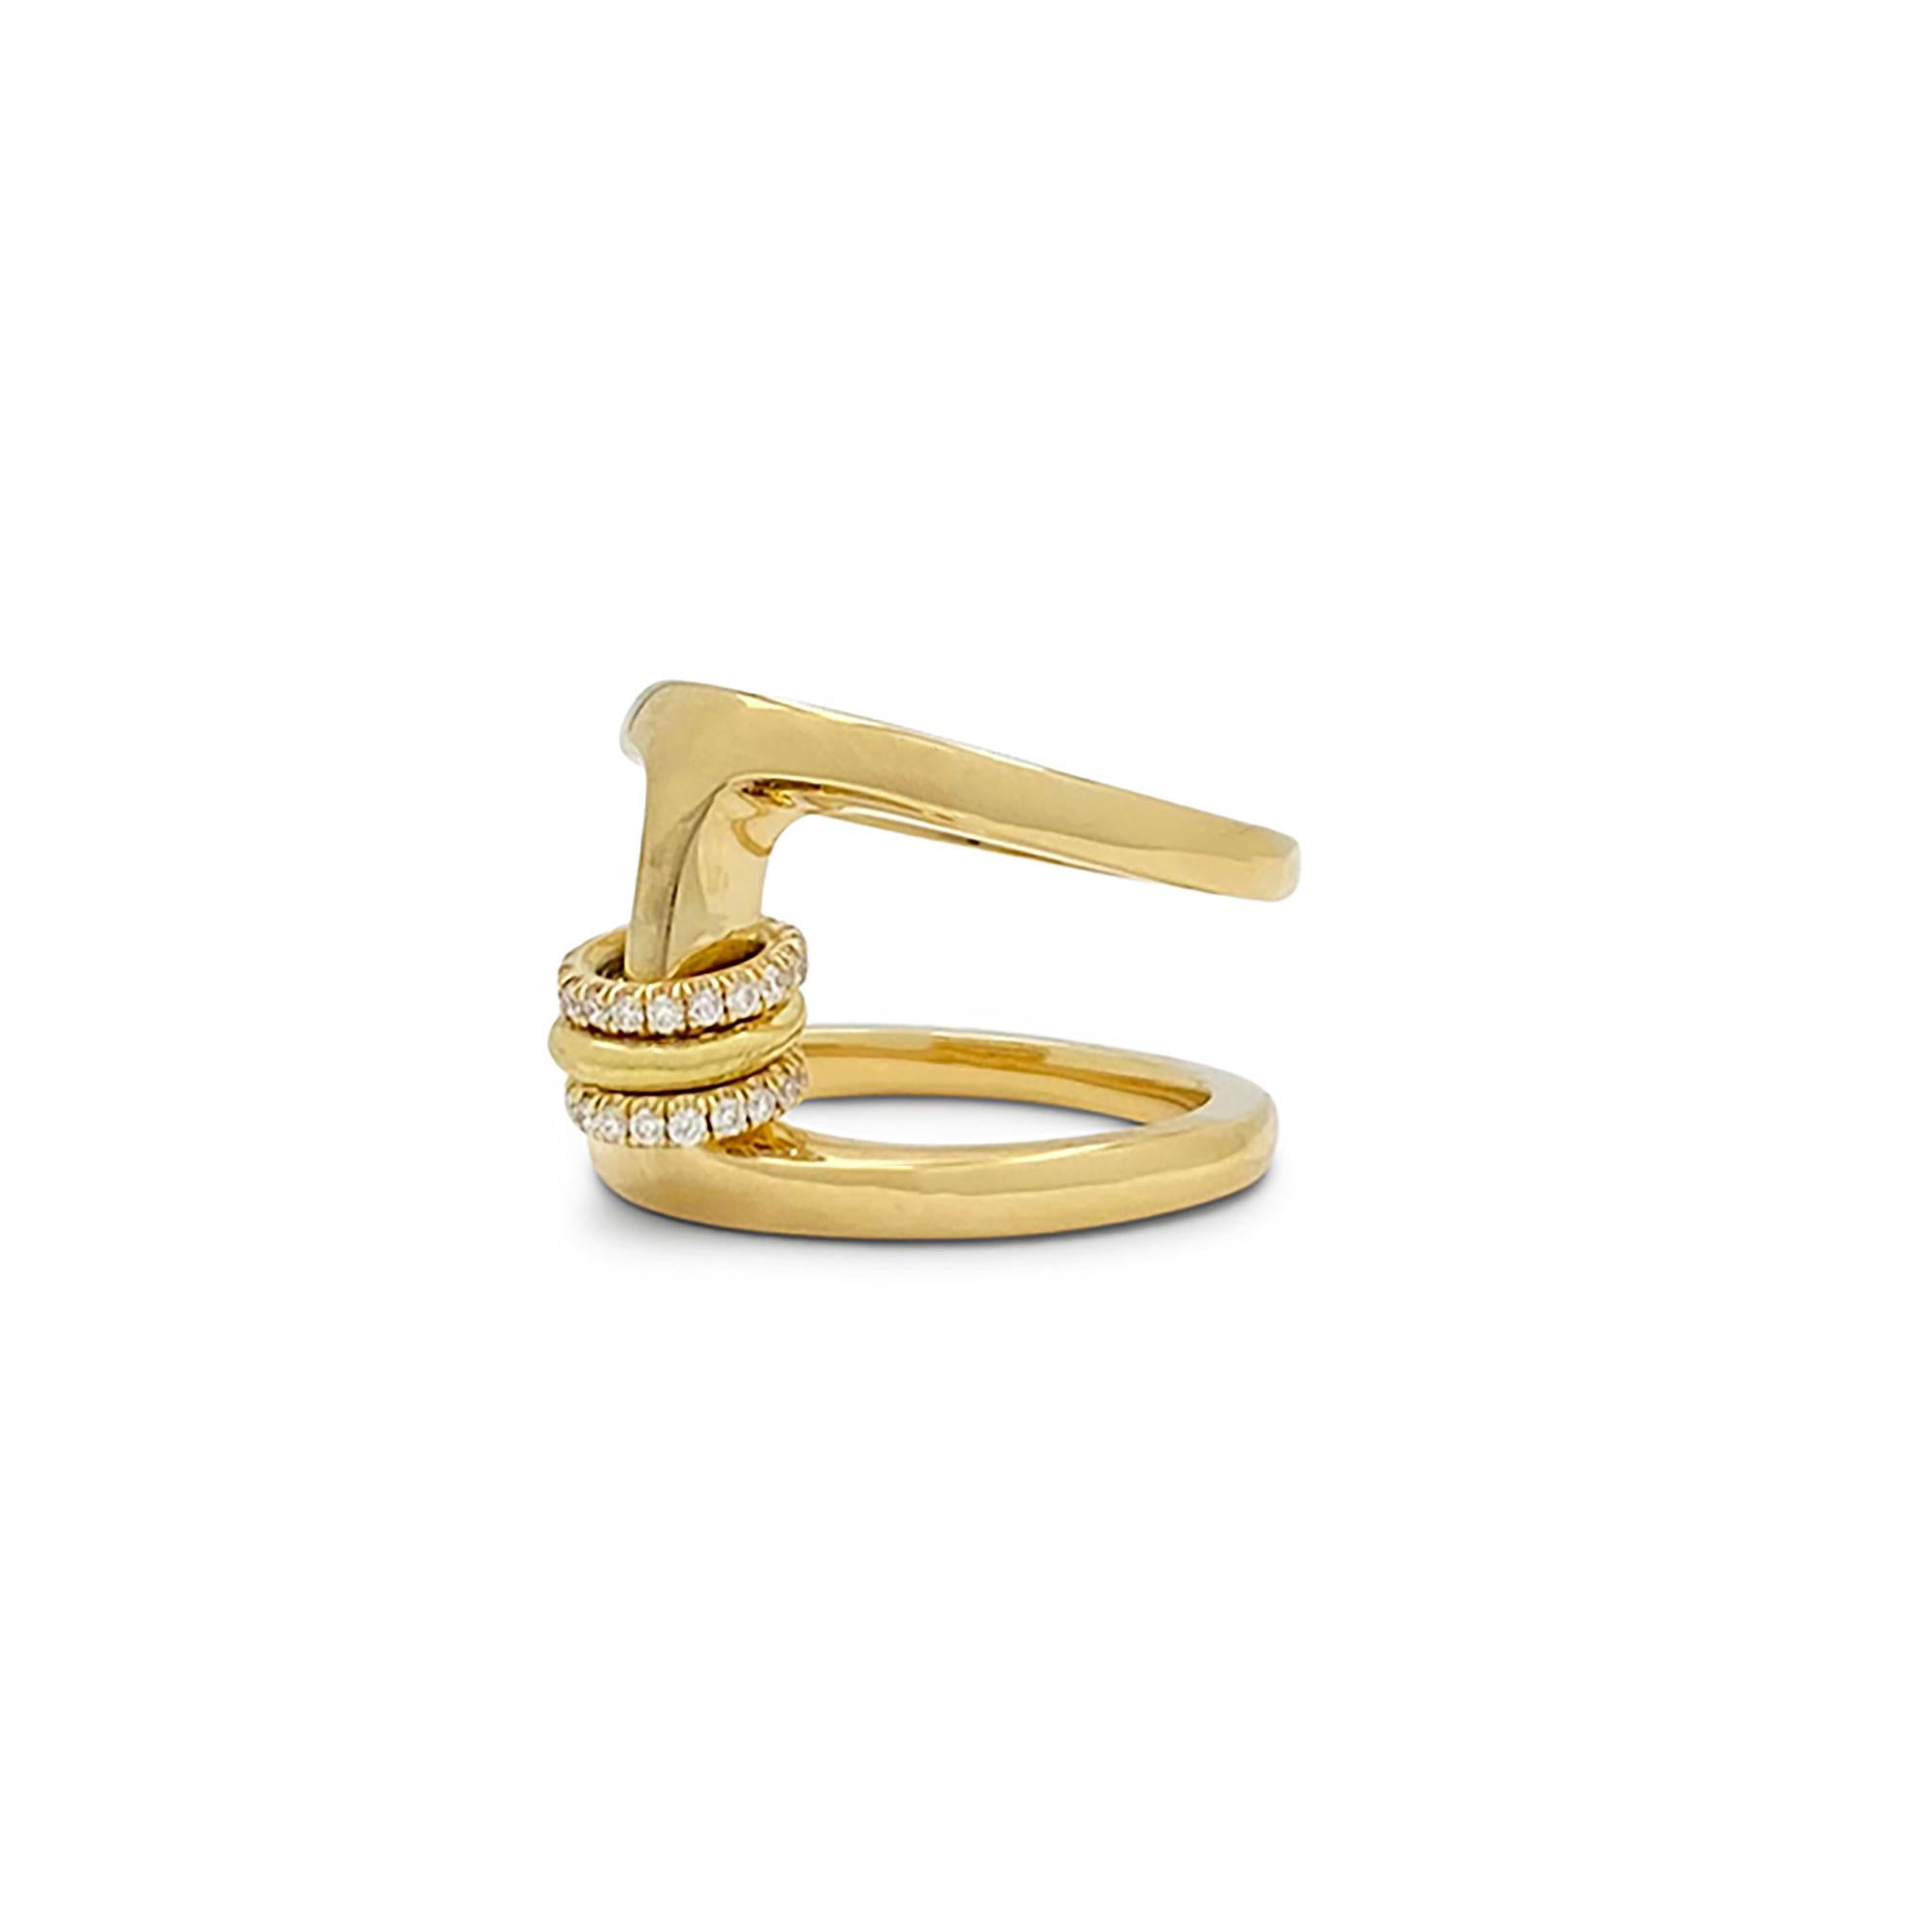 Authentic 18 karat yellow gold ring from the 333 collection by Spinelli Kilcollin x Hoorsenbuhs.  The center of the signature Hoorsenbuhs Phantom ring is adorned with three Spinelli Kilcollin annulets, two of which are set with glittering round